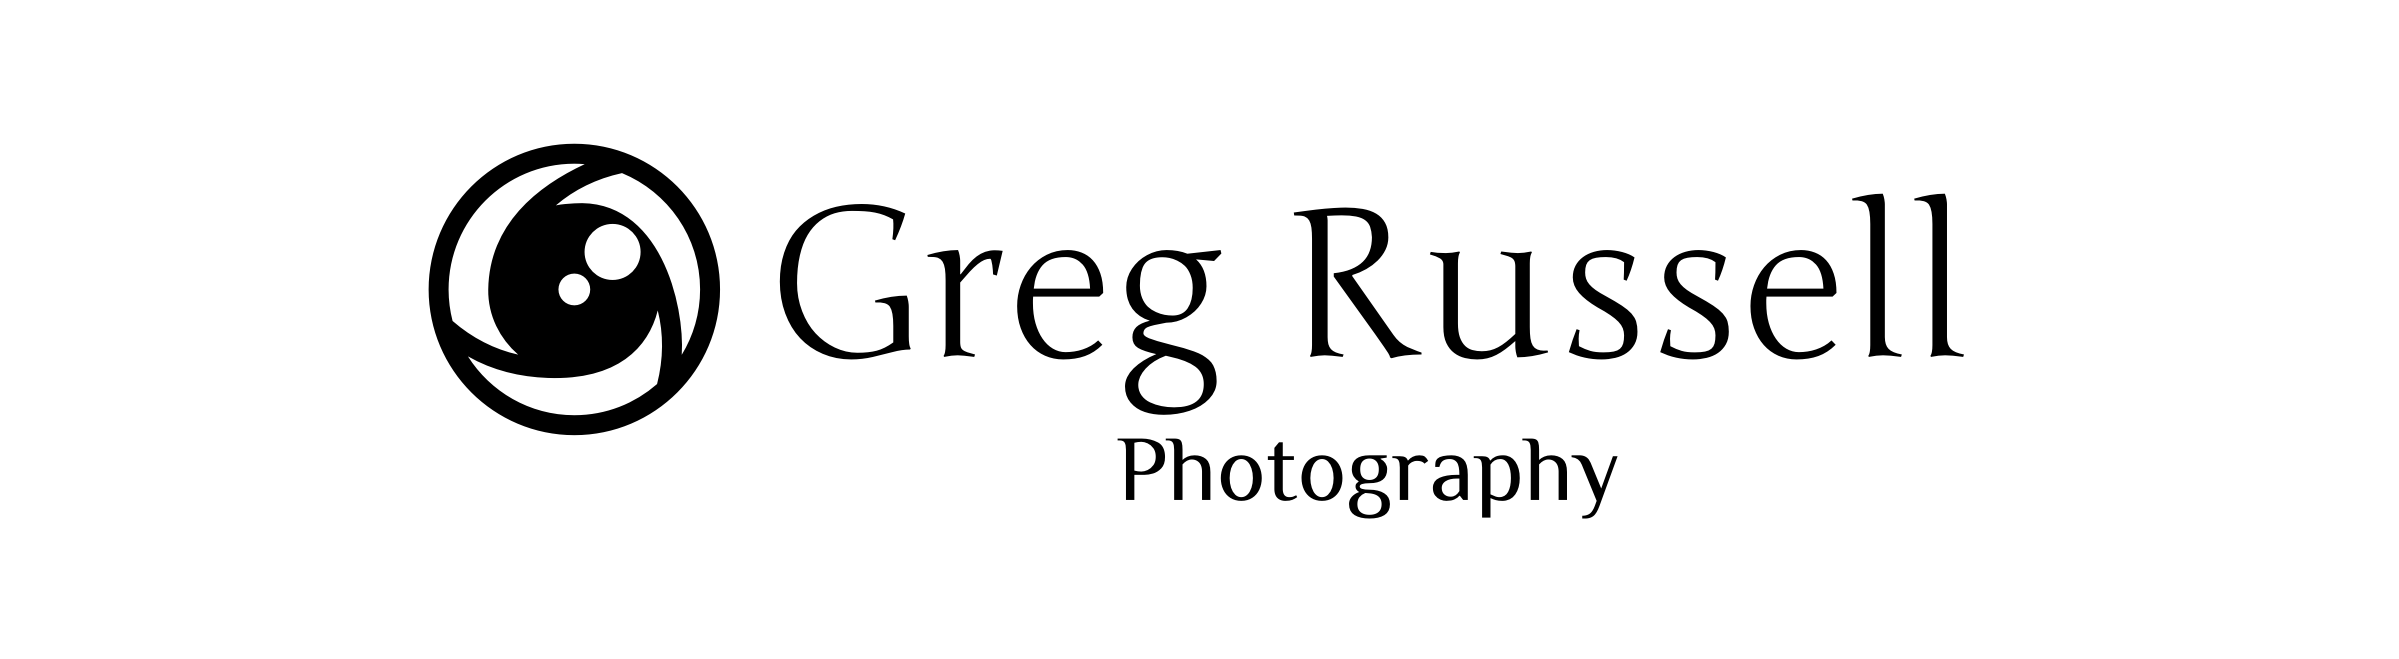 Greg Russell Photography